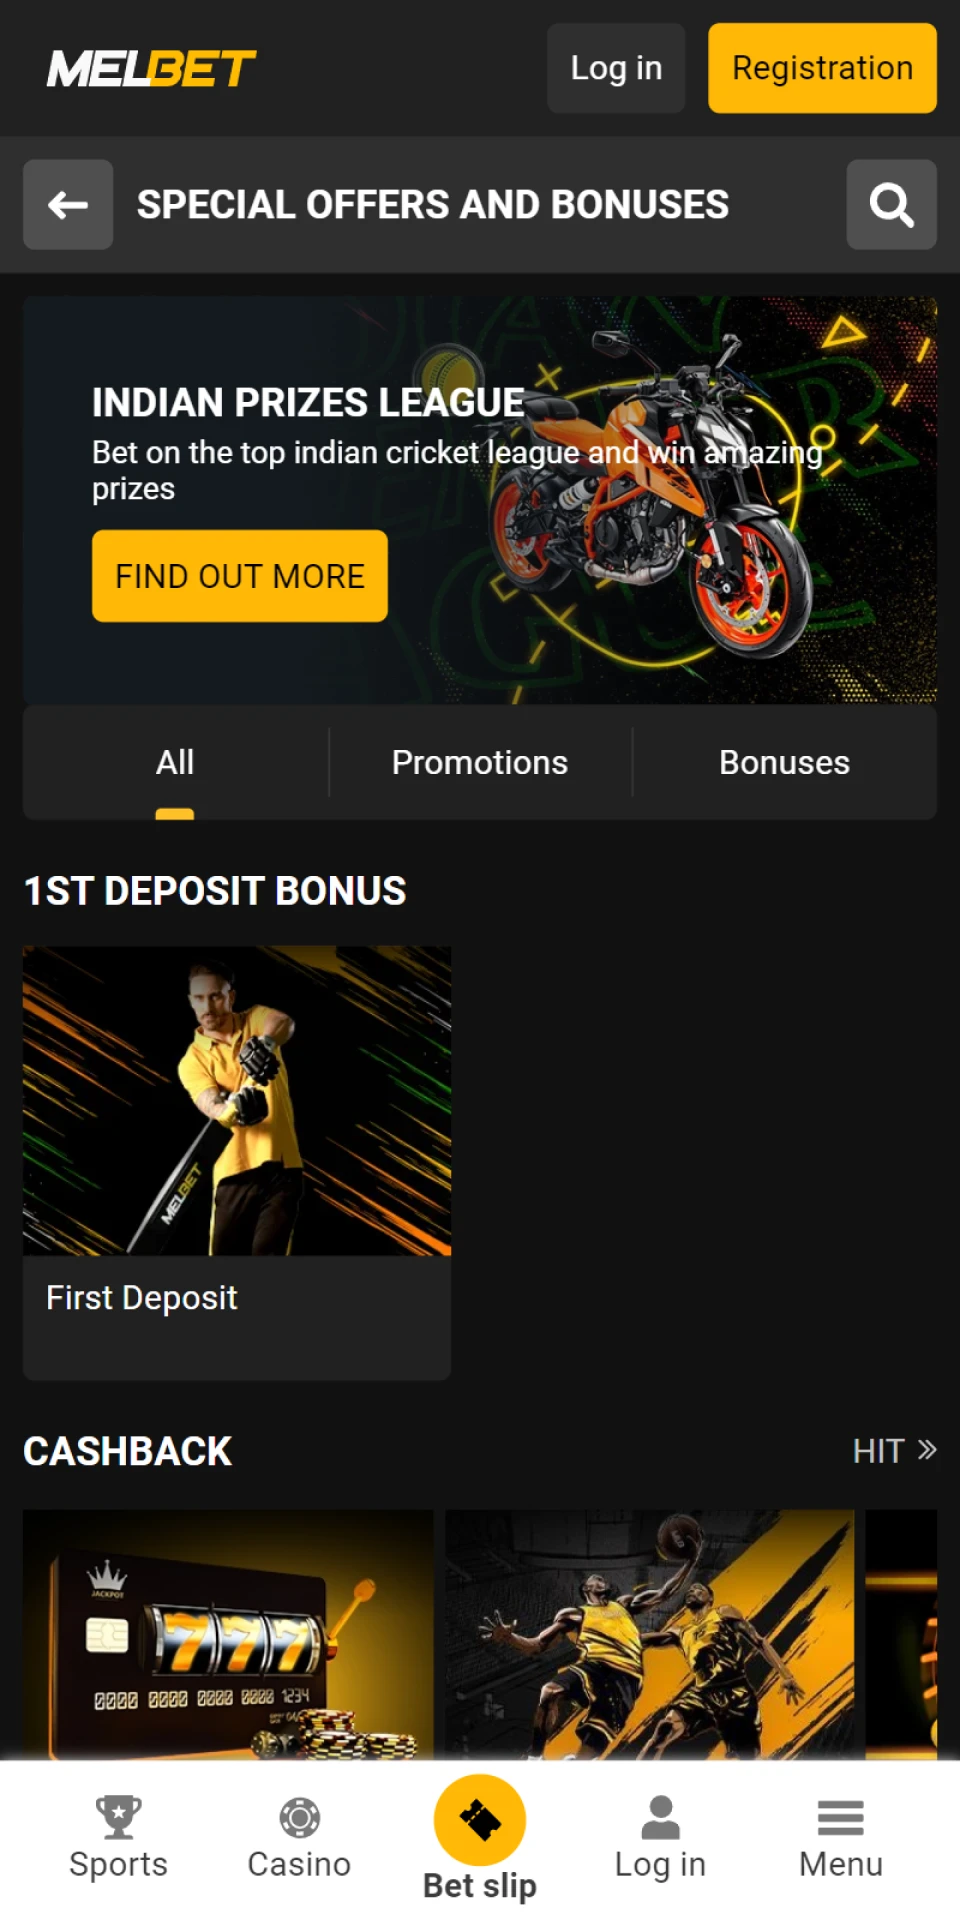 The Melbet mobile app has a large section with various bonuses.